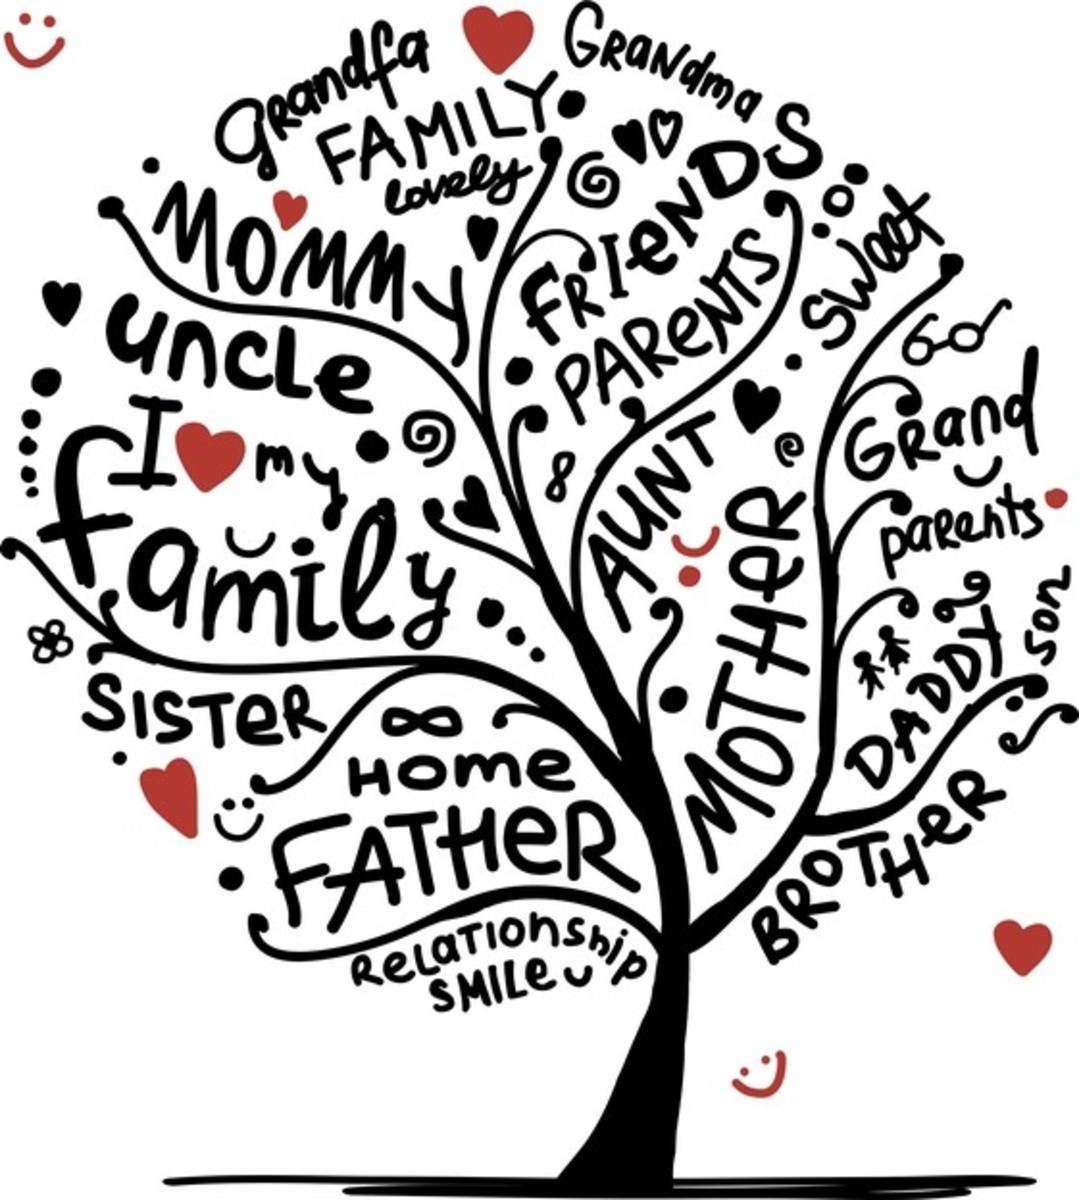 Appreciate the branches in your family tree!